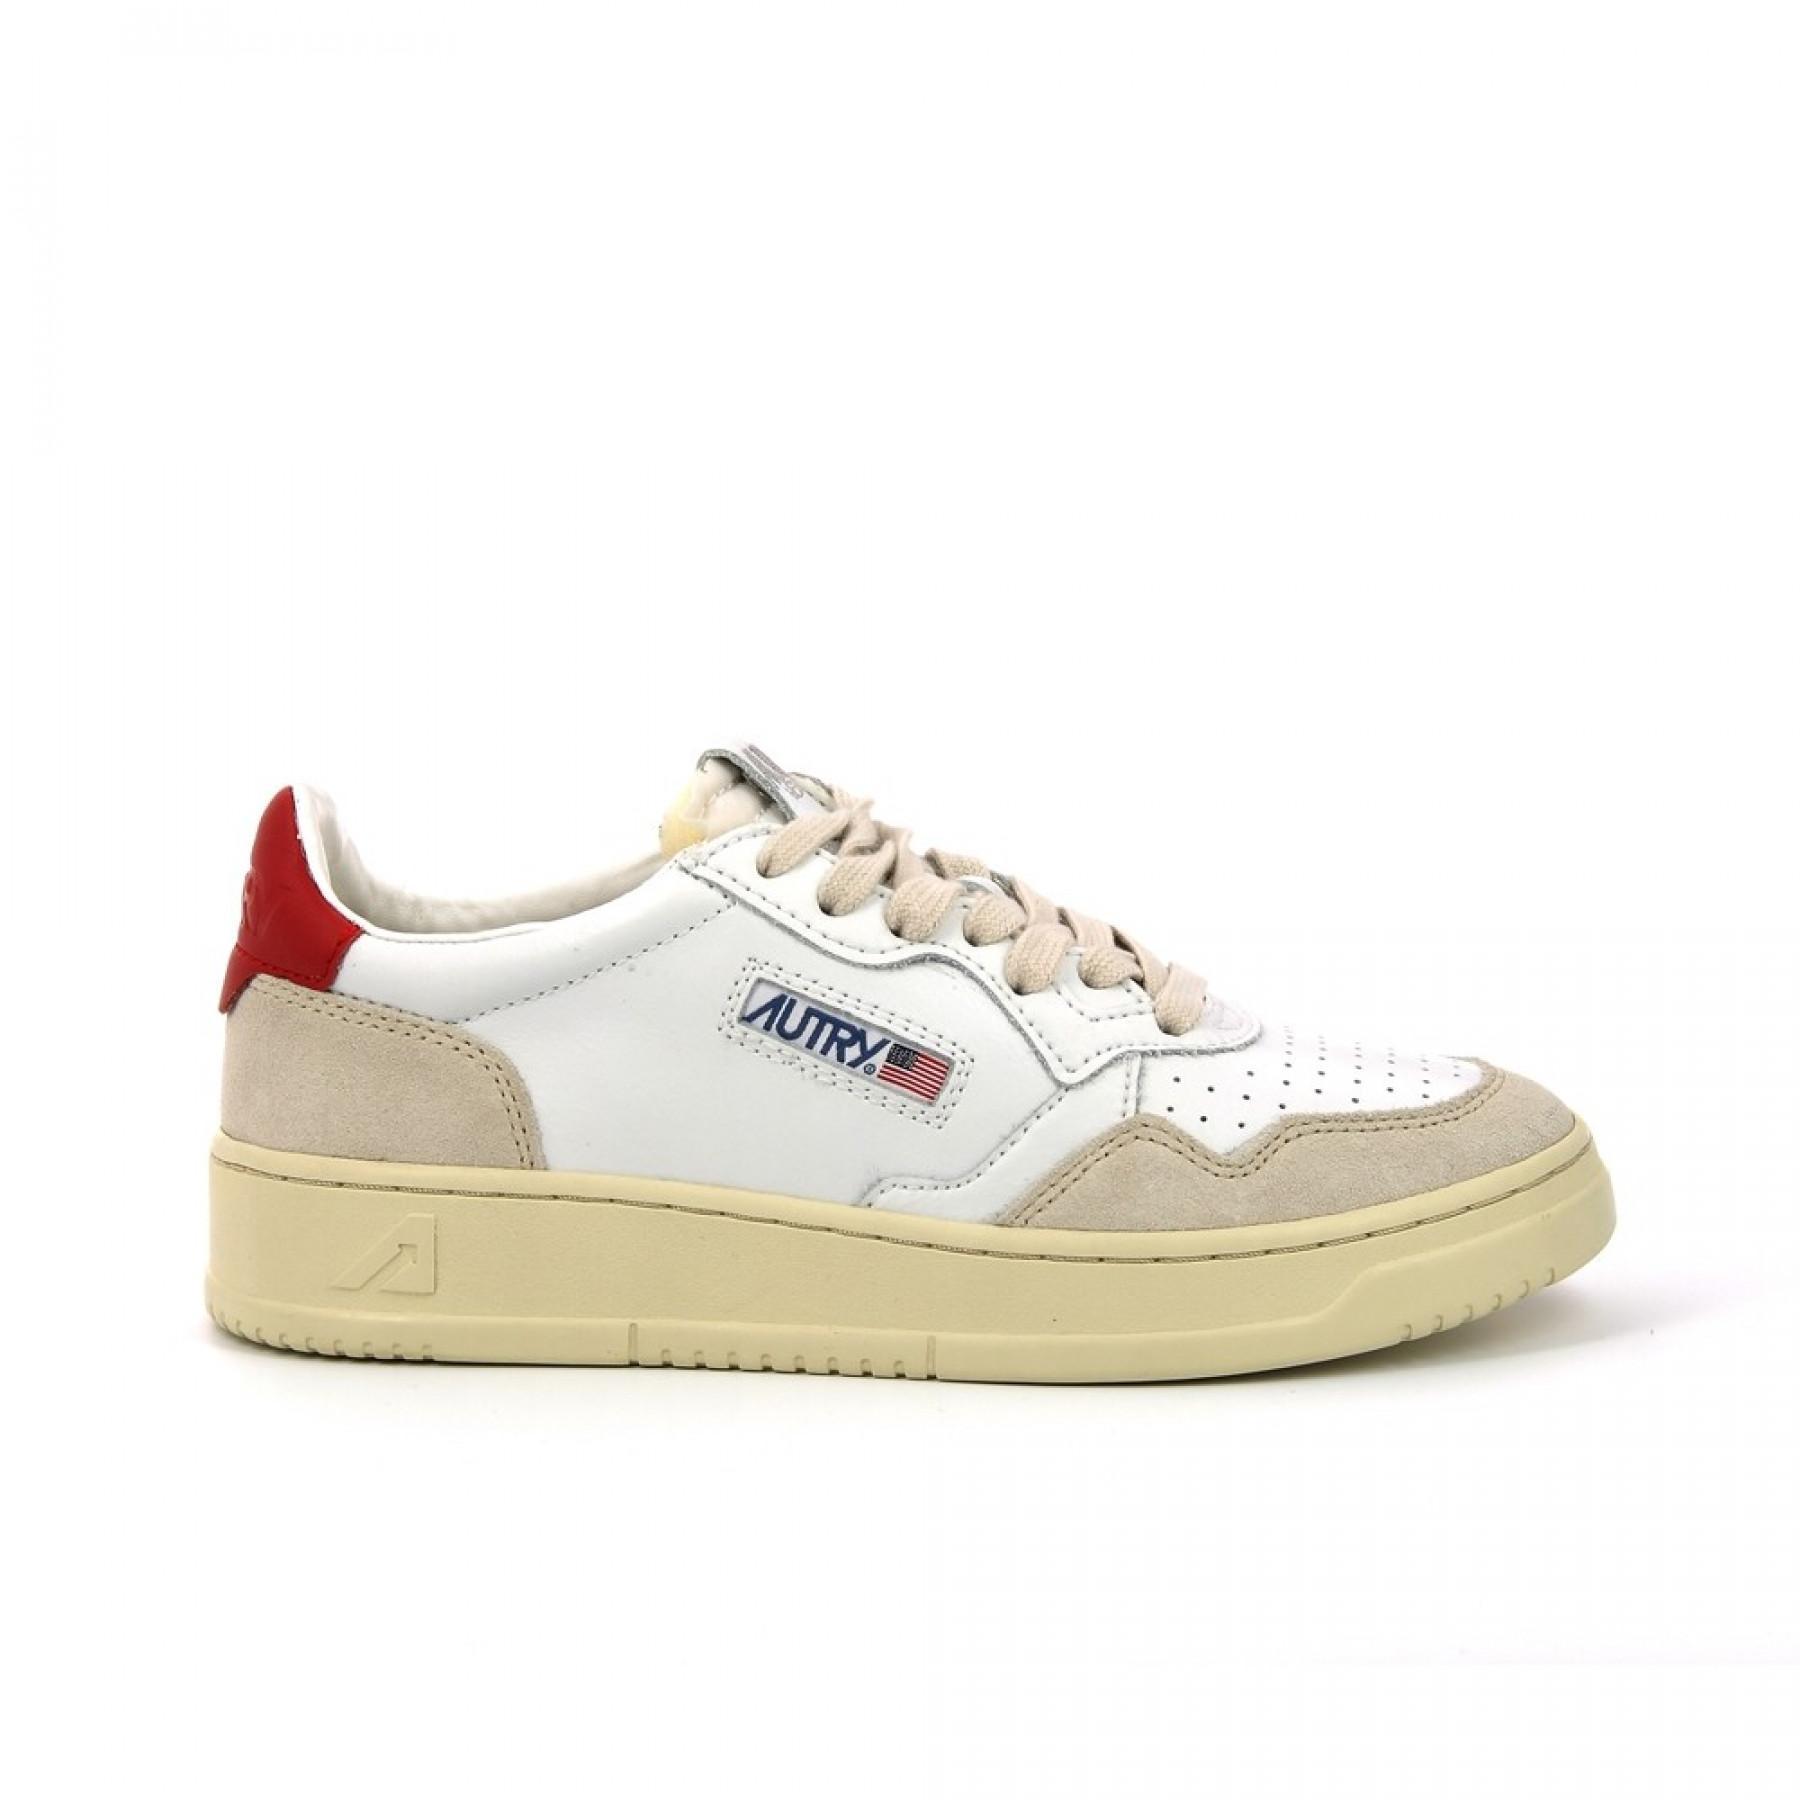 Women's sneakers Autry Medalist LS24 Leather/Suede White Red